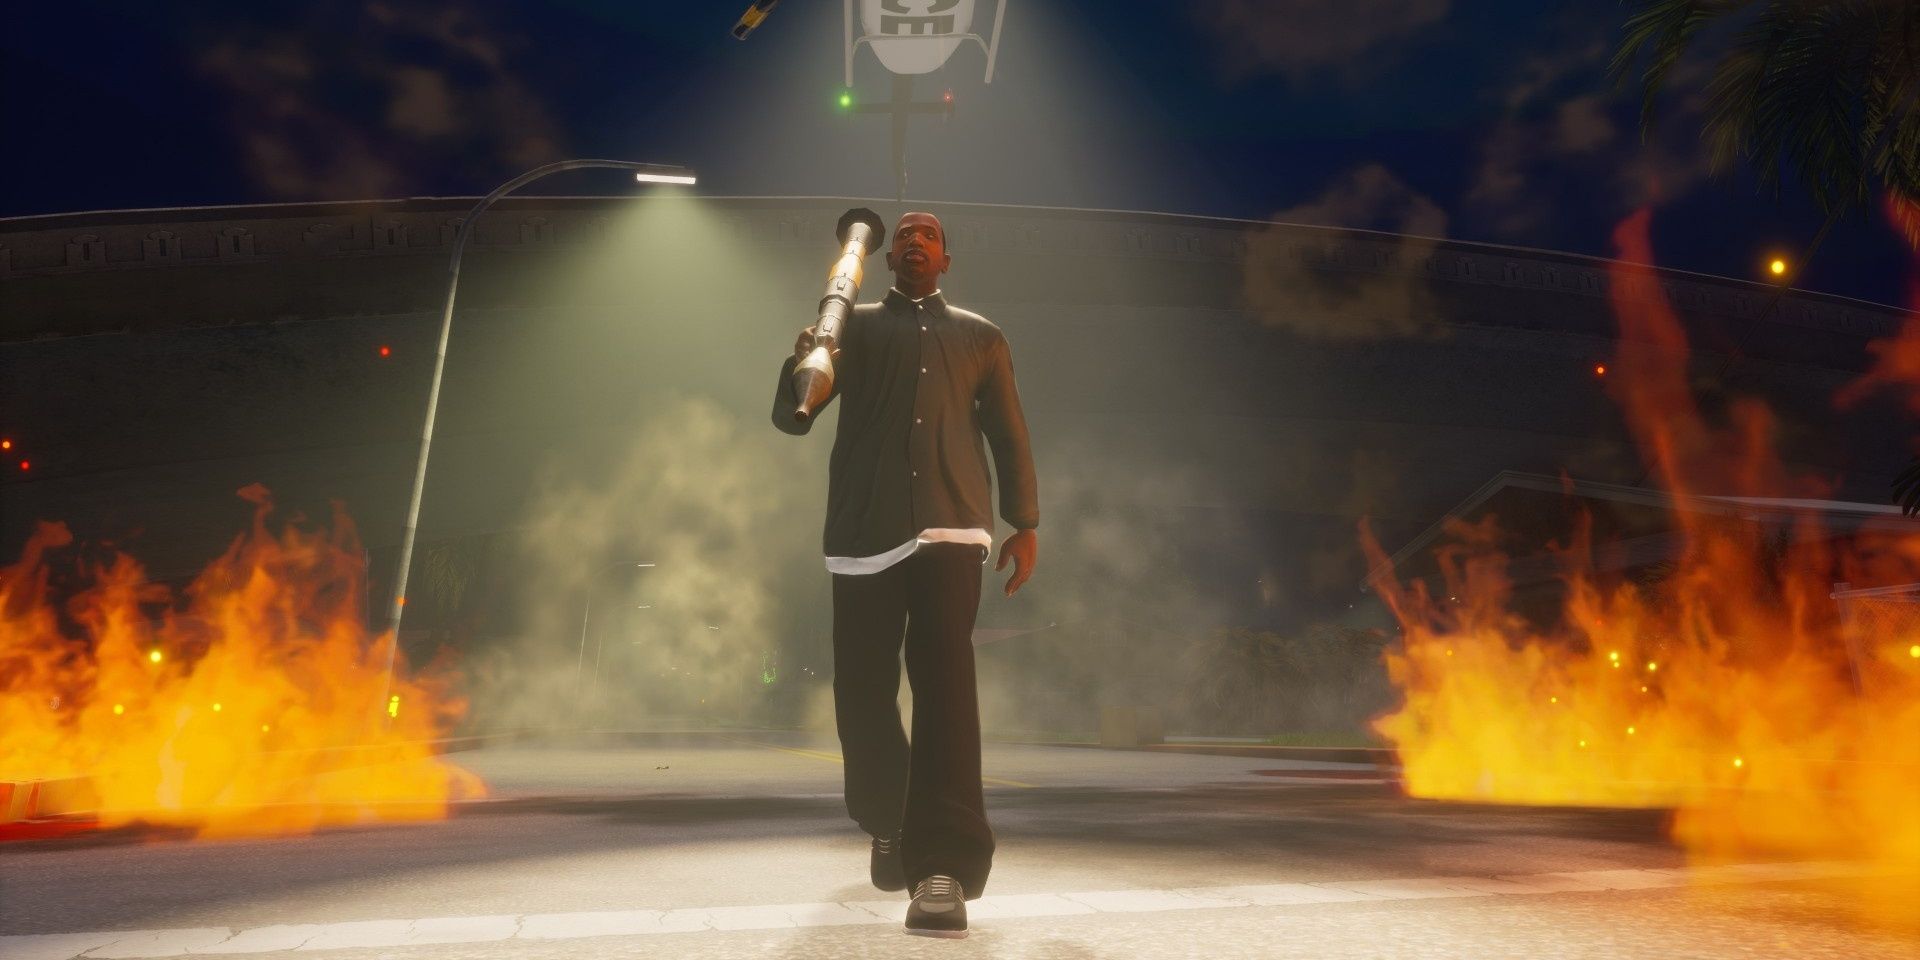 A screenshot showing CJ with a rocket launcher walking in front of flames in Grand Theft Auto: San Andreas - The Definitive Edition